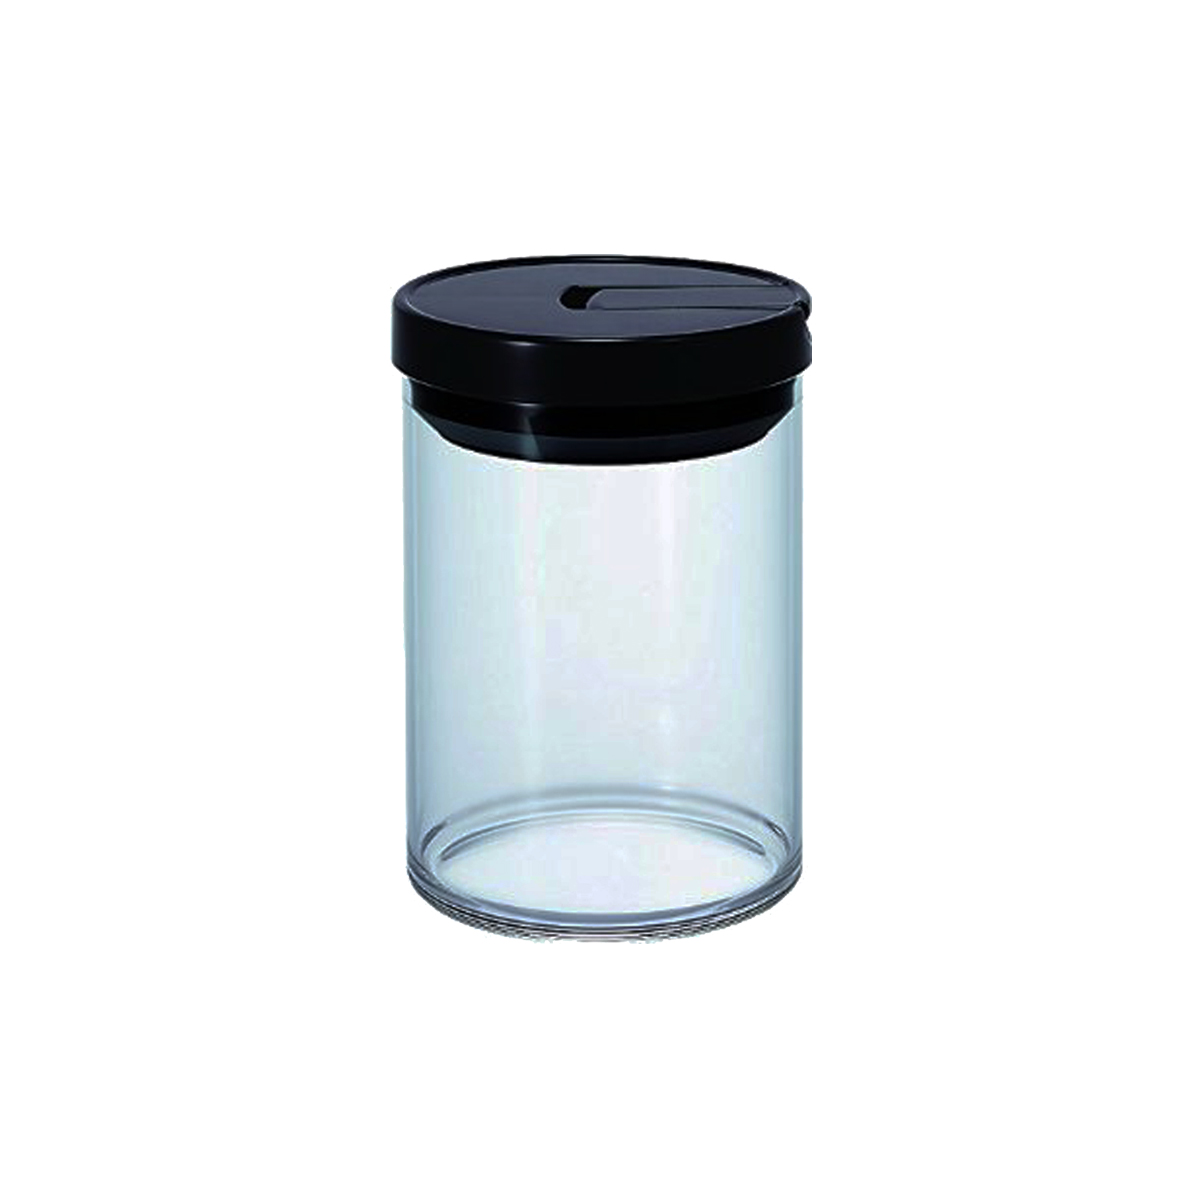 Hario Glass Canister Black MCN-200B